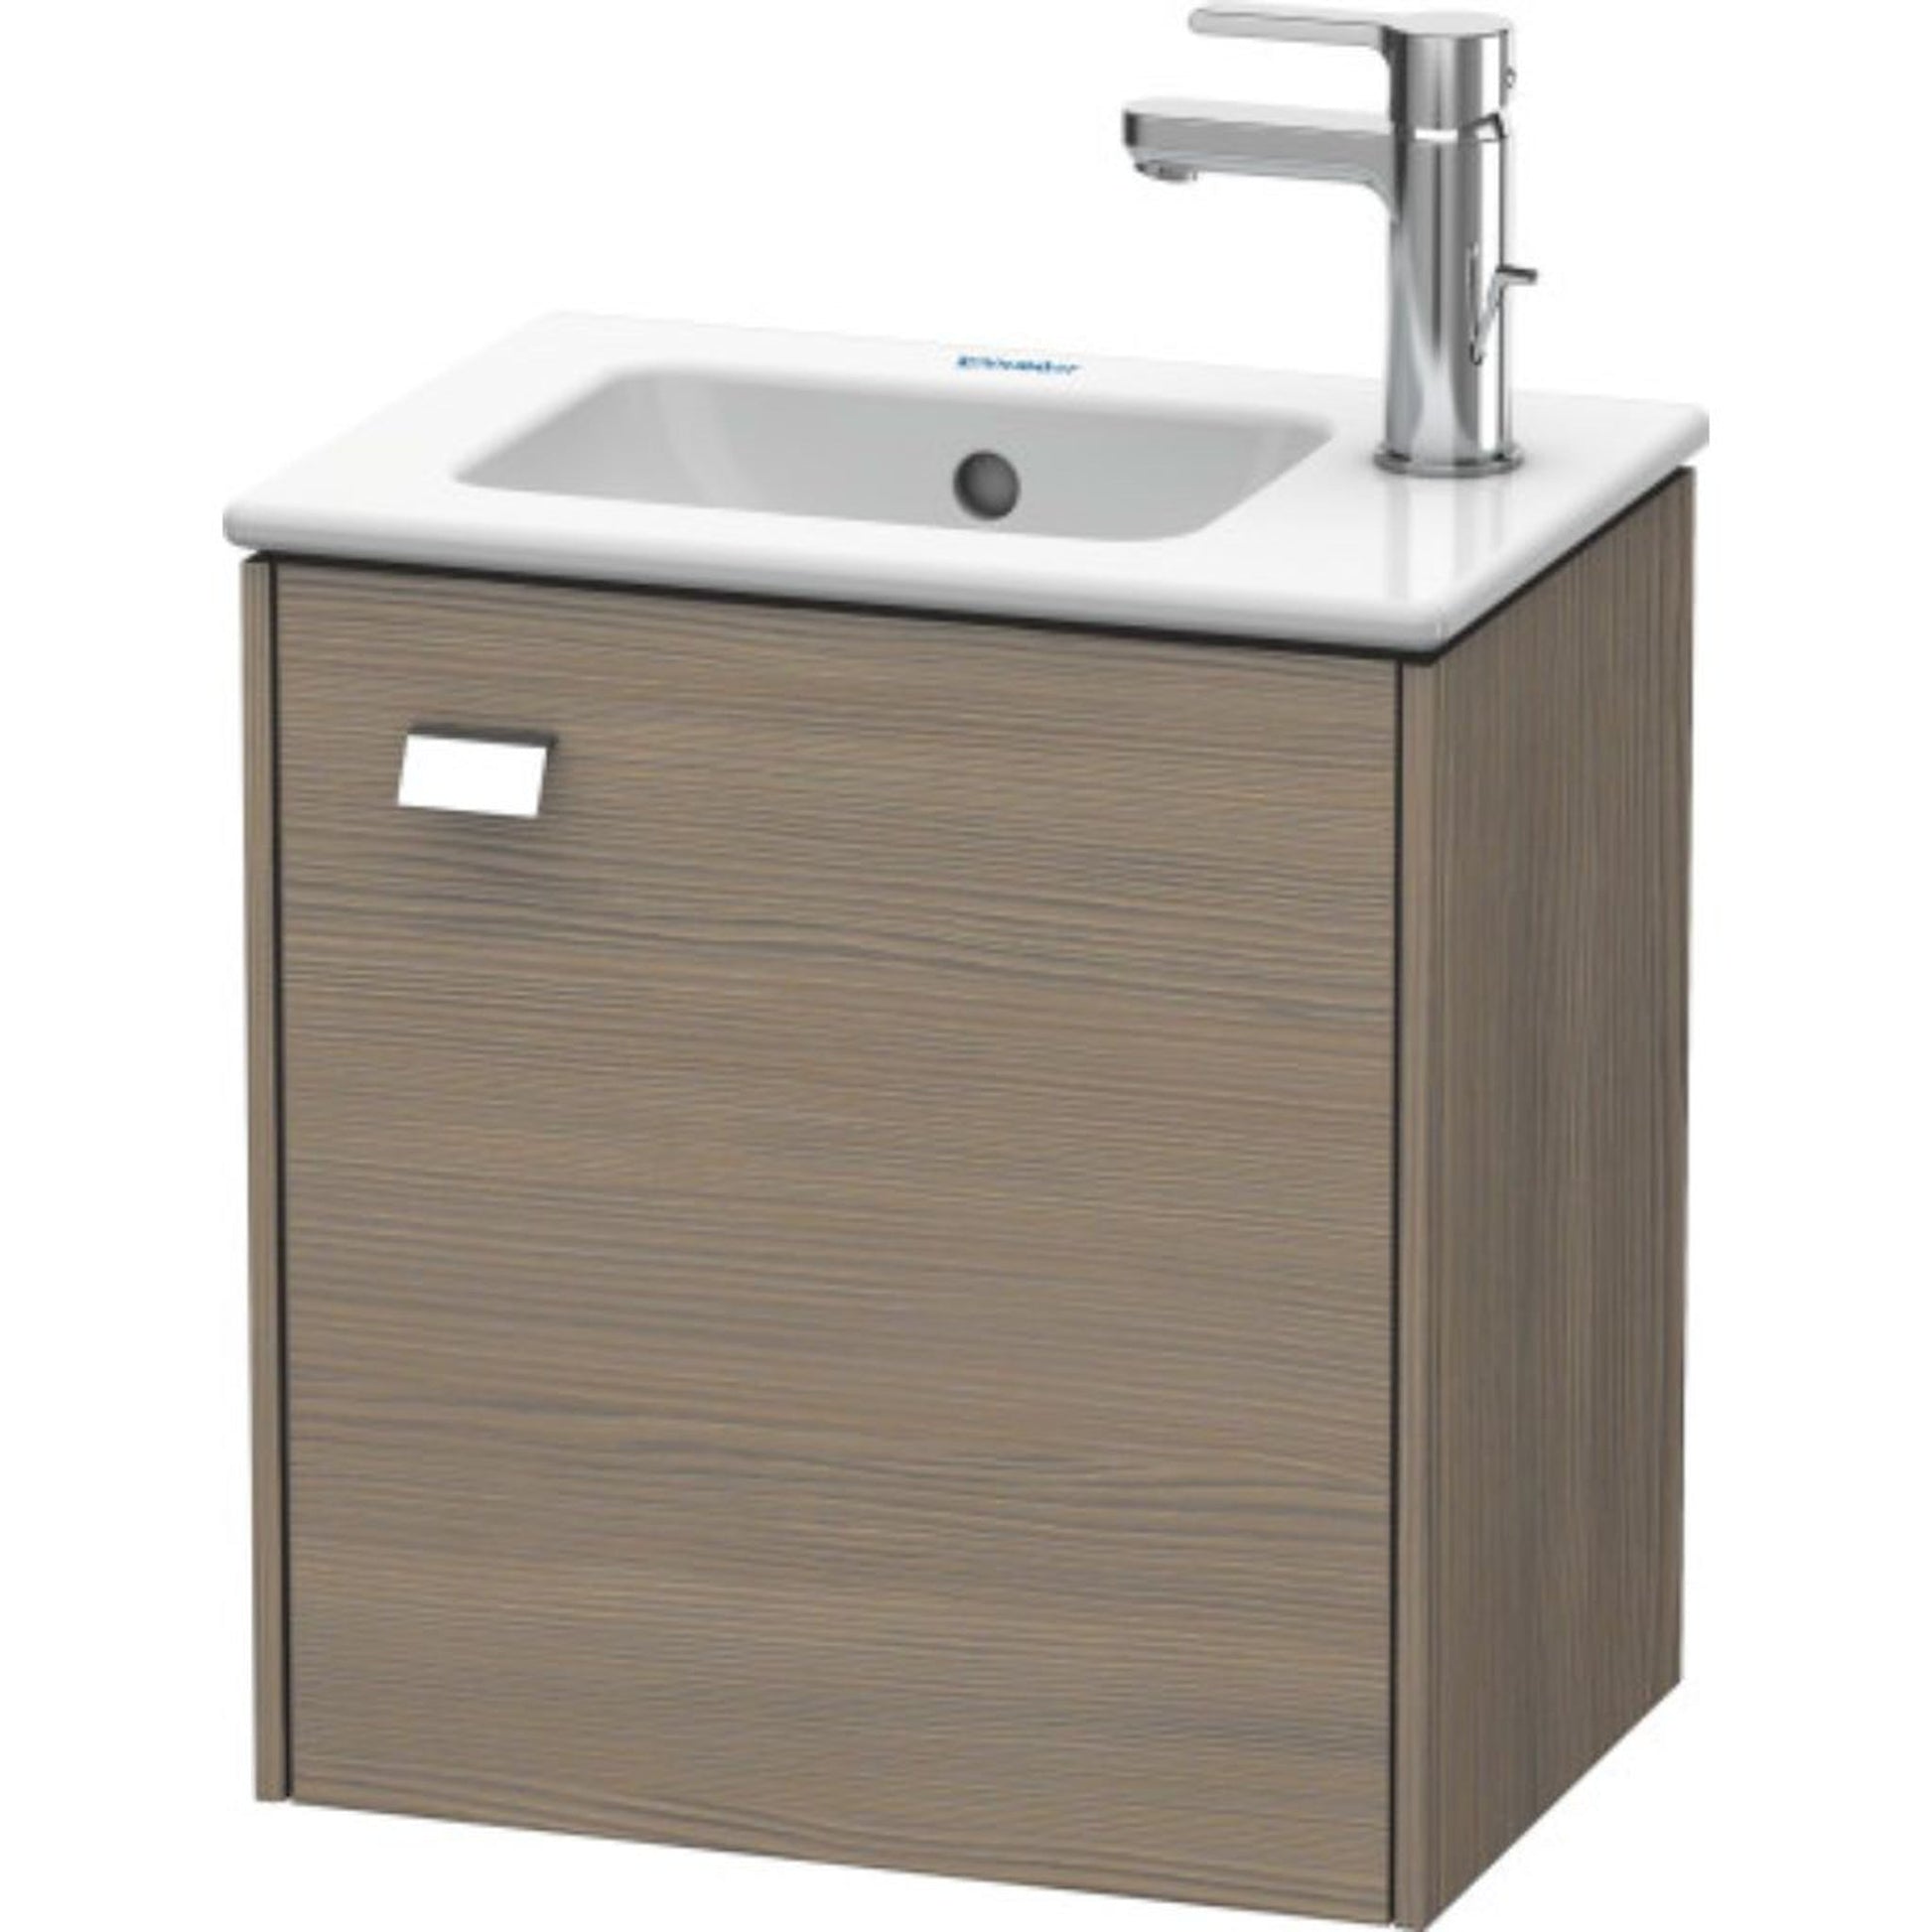 Duravit Brioso 17" x 17" x 11" Wall-Mount Vanity Unit With Right Hinge One Door Cabinet in Oak Terra and Chrome Handle